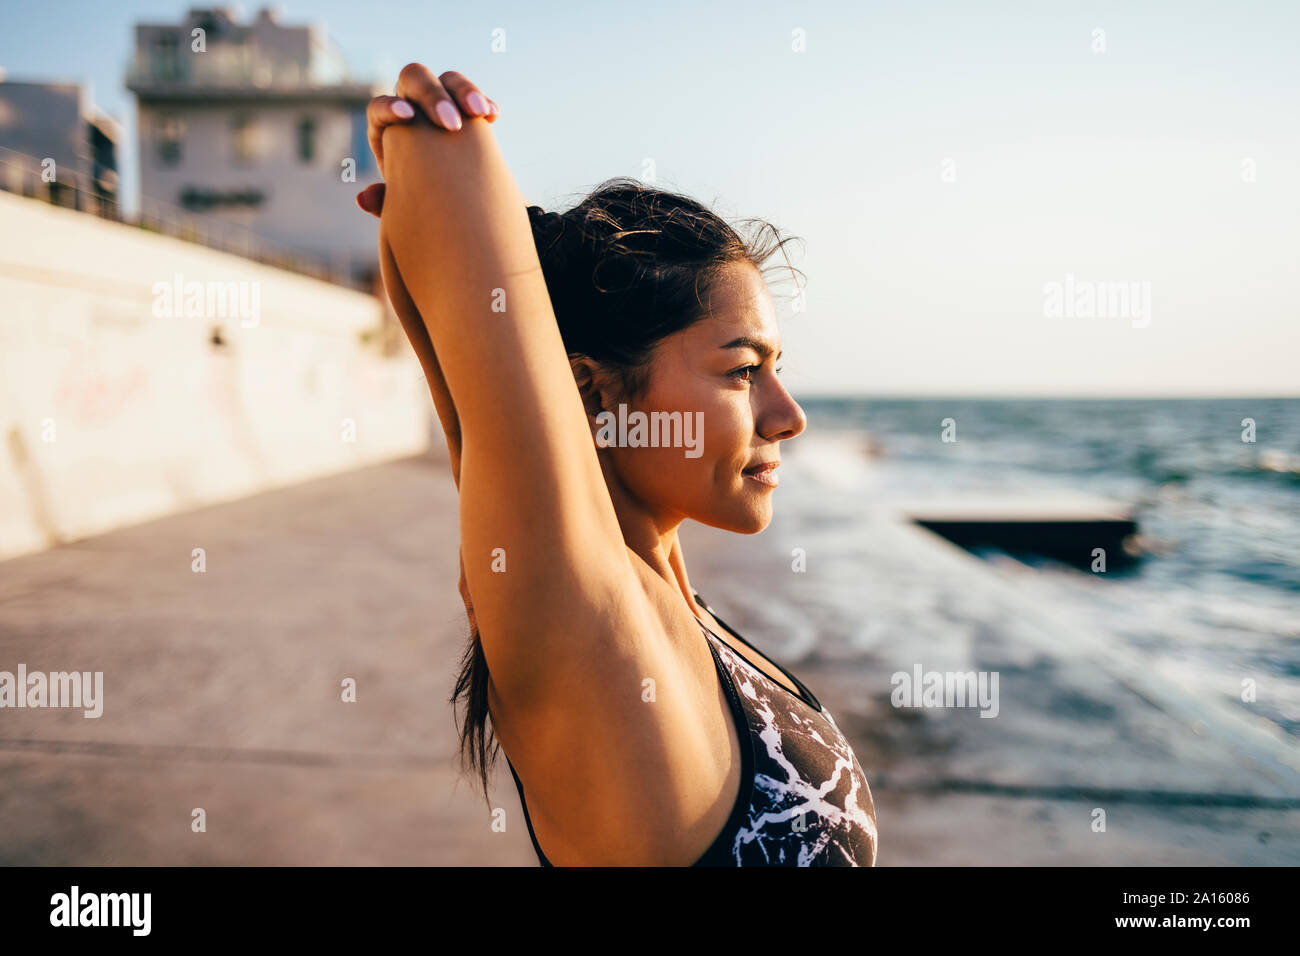 Young sportswoman stretching her arm Stock Photo